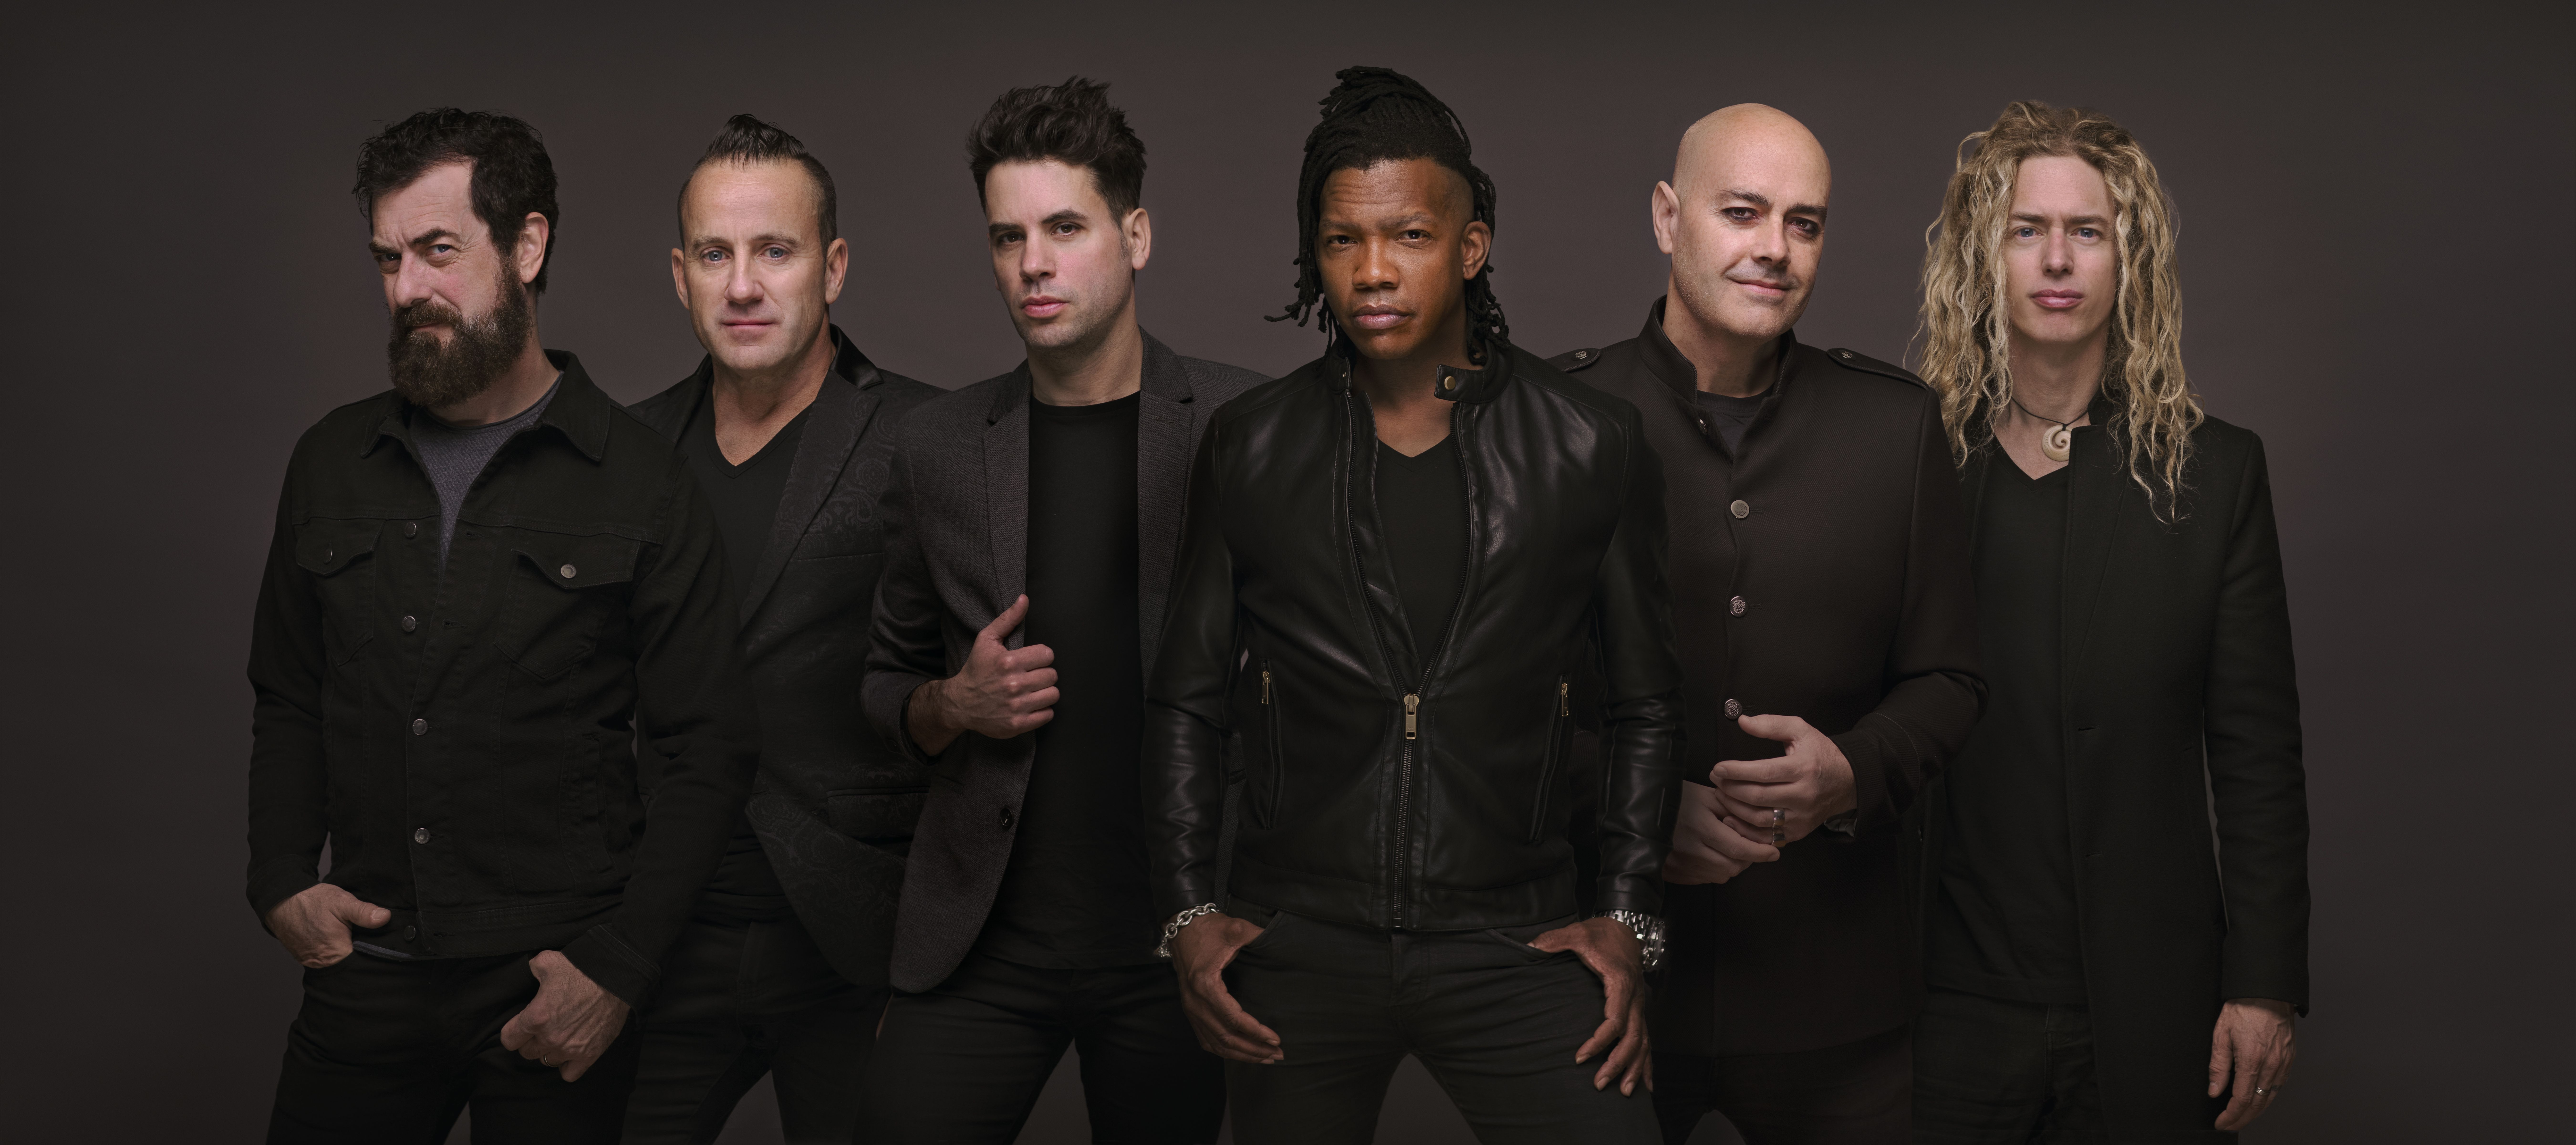 News: Newsboys United To Headline Fox And Friends' “All American Summer Concert Series” August 16